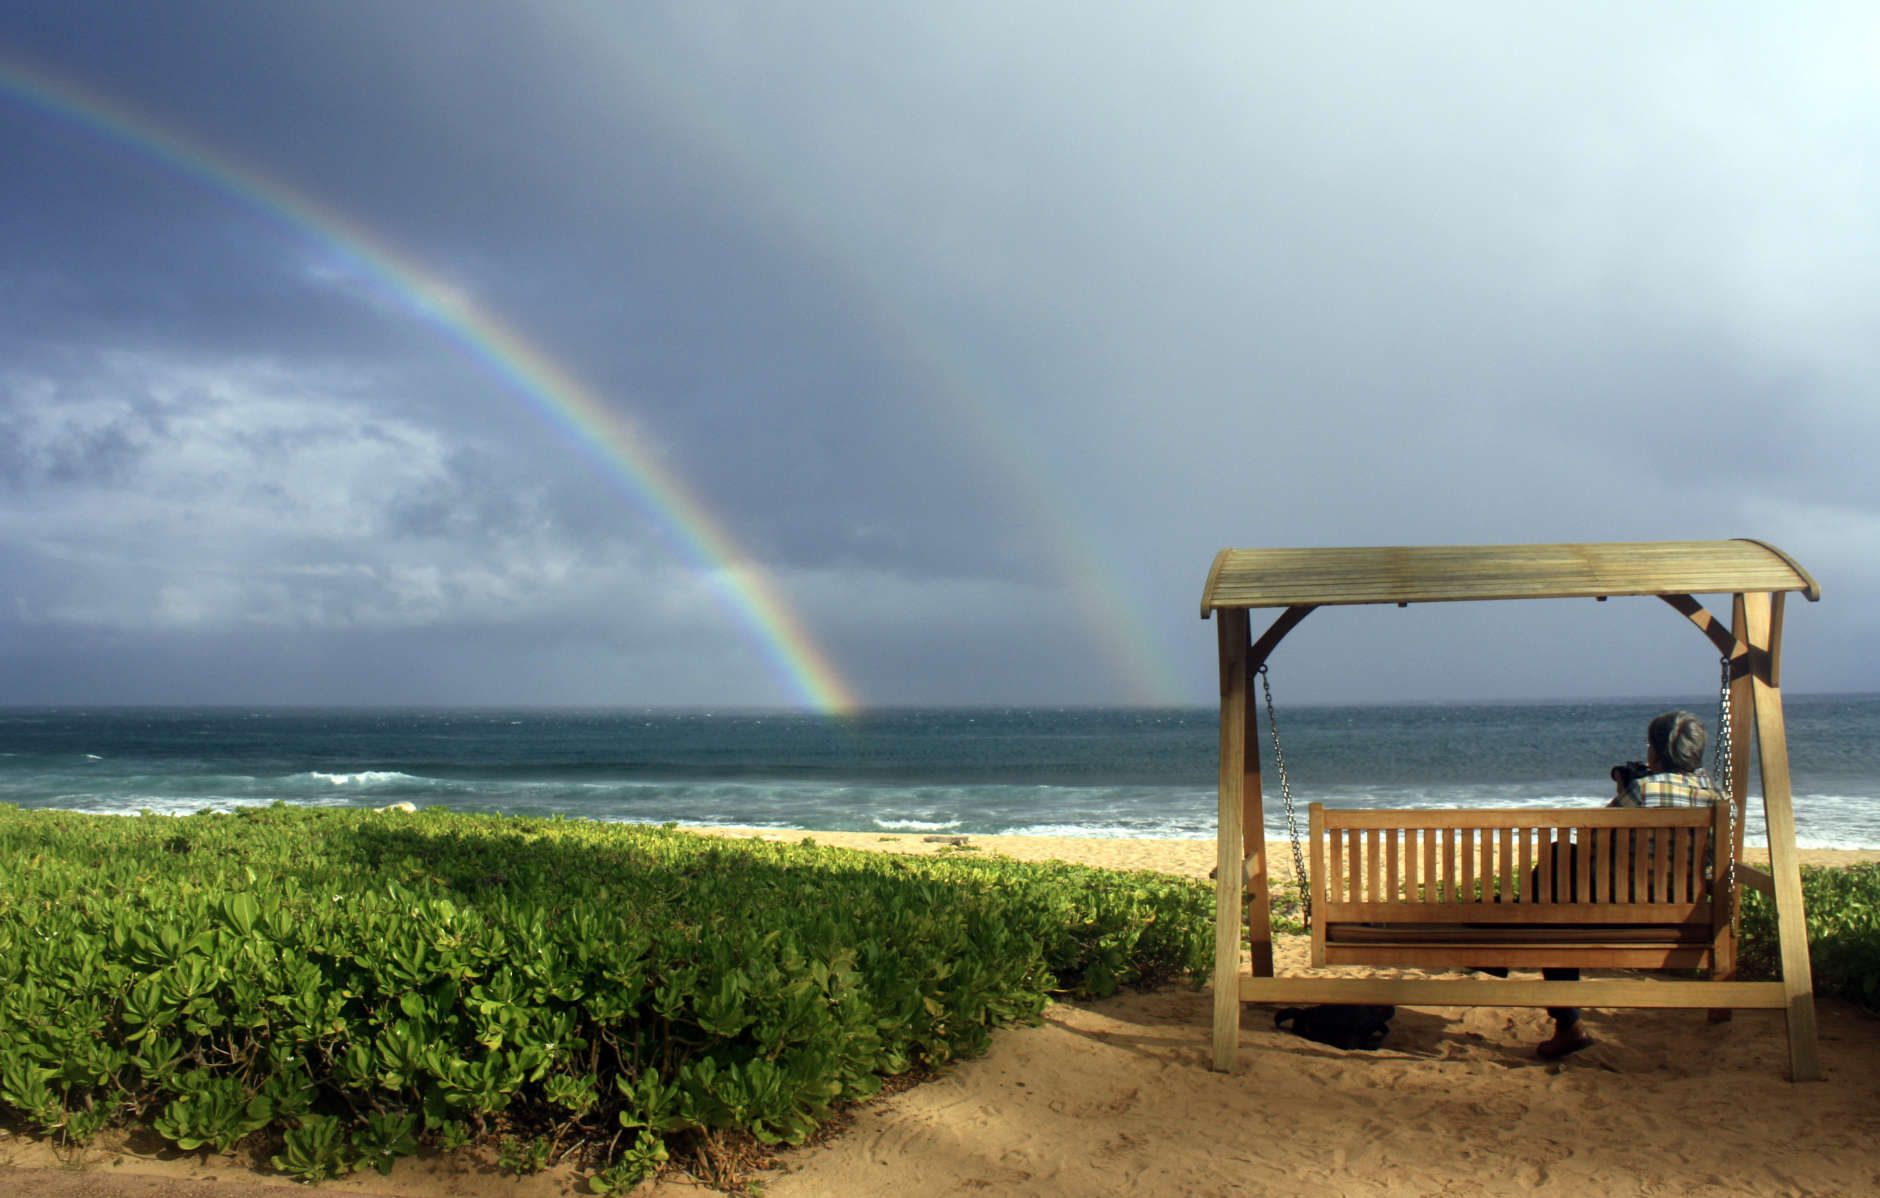 This July 2, 2010 photo shows Joseph Heher photographing rainbows at Shipwreck's Beach, Grand Hyatt Kauai in Hawaii.  A good way to see the sights, and get your own photo souvenirs, while on vacation is to sign up for a guided photo tour.   (AP Photo/Ashley Heher)